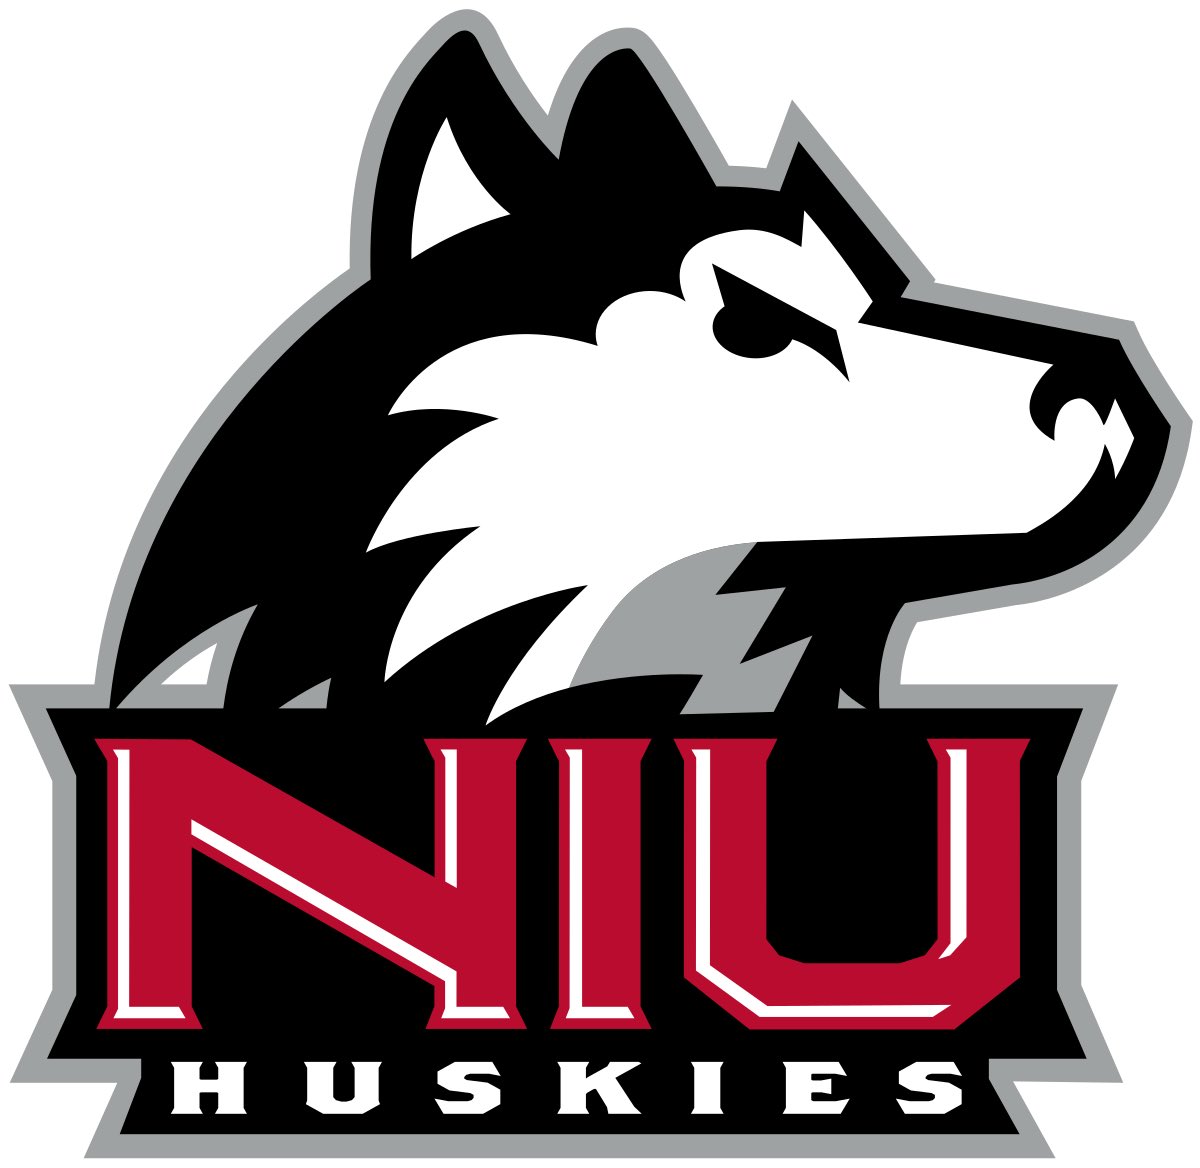 Thank you @NIU_Football and Coach @CoachGigli for stopping by school this week to talk about Stewartville Football and meet with our student-athletes! #WaterIt #TigerPride